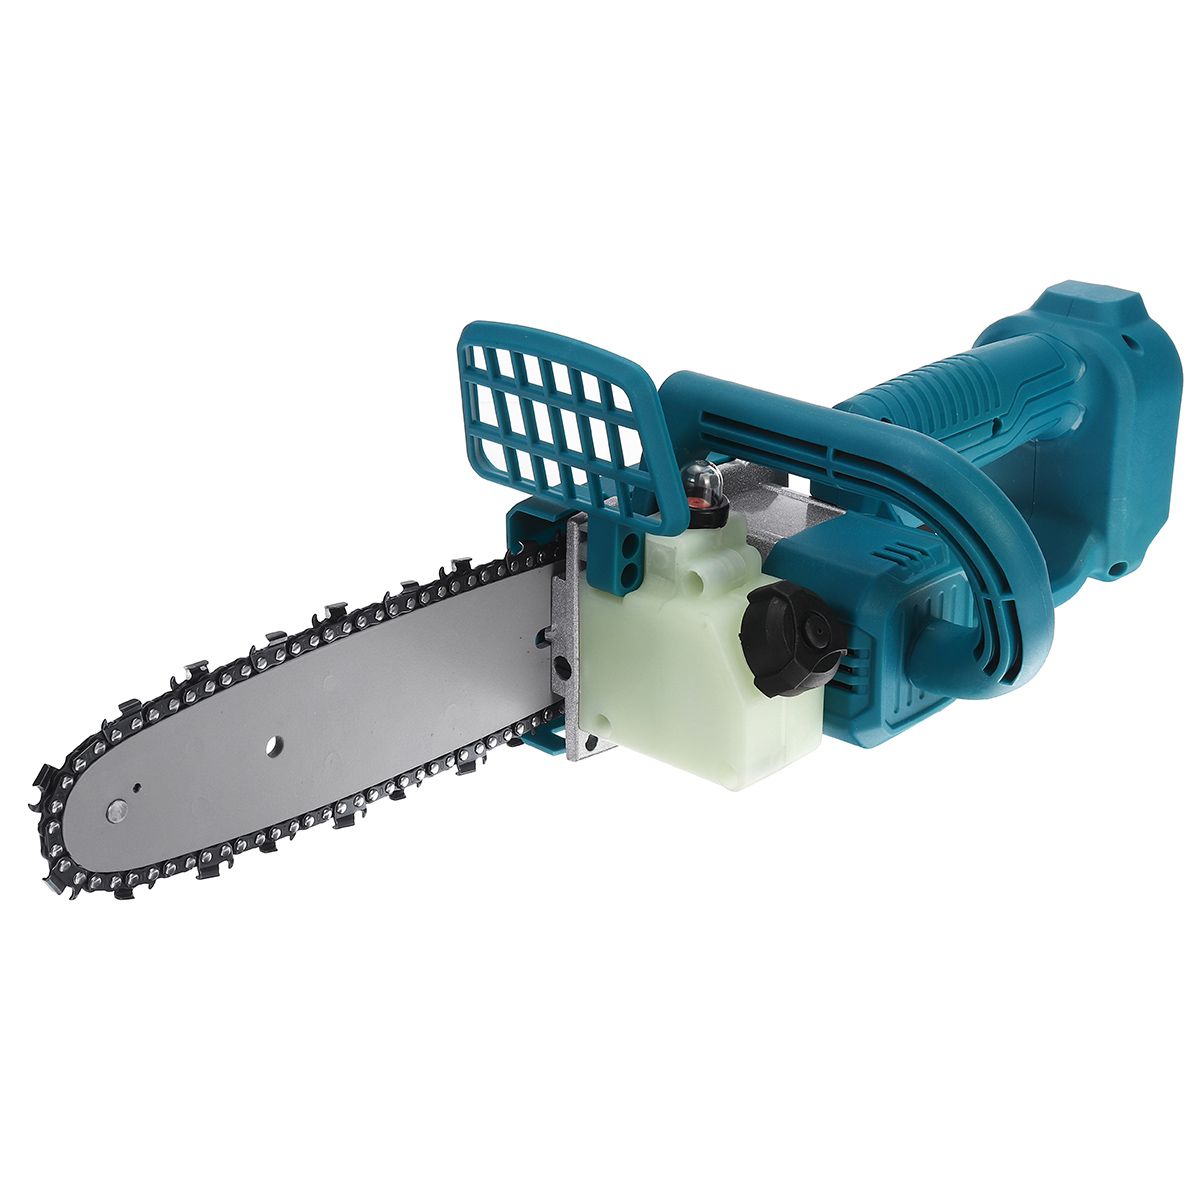 Woodworking-Electric-Chain-Saw-Portable-Wood-Cutting-Pruning-Tool-Without-Battery-1743313